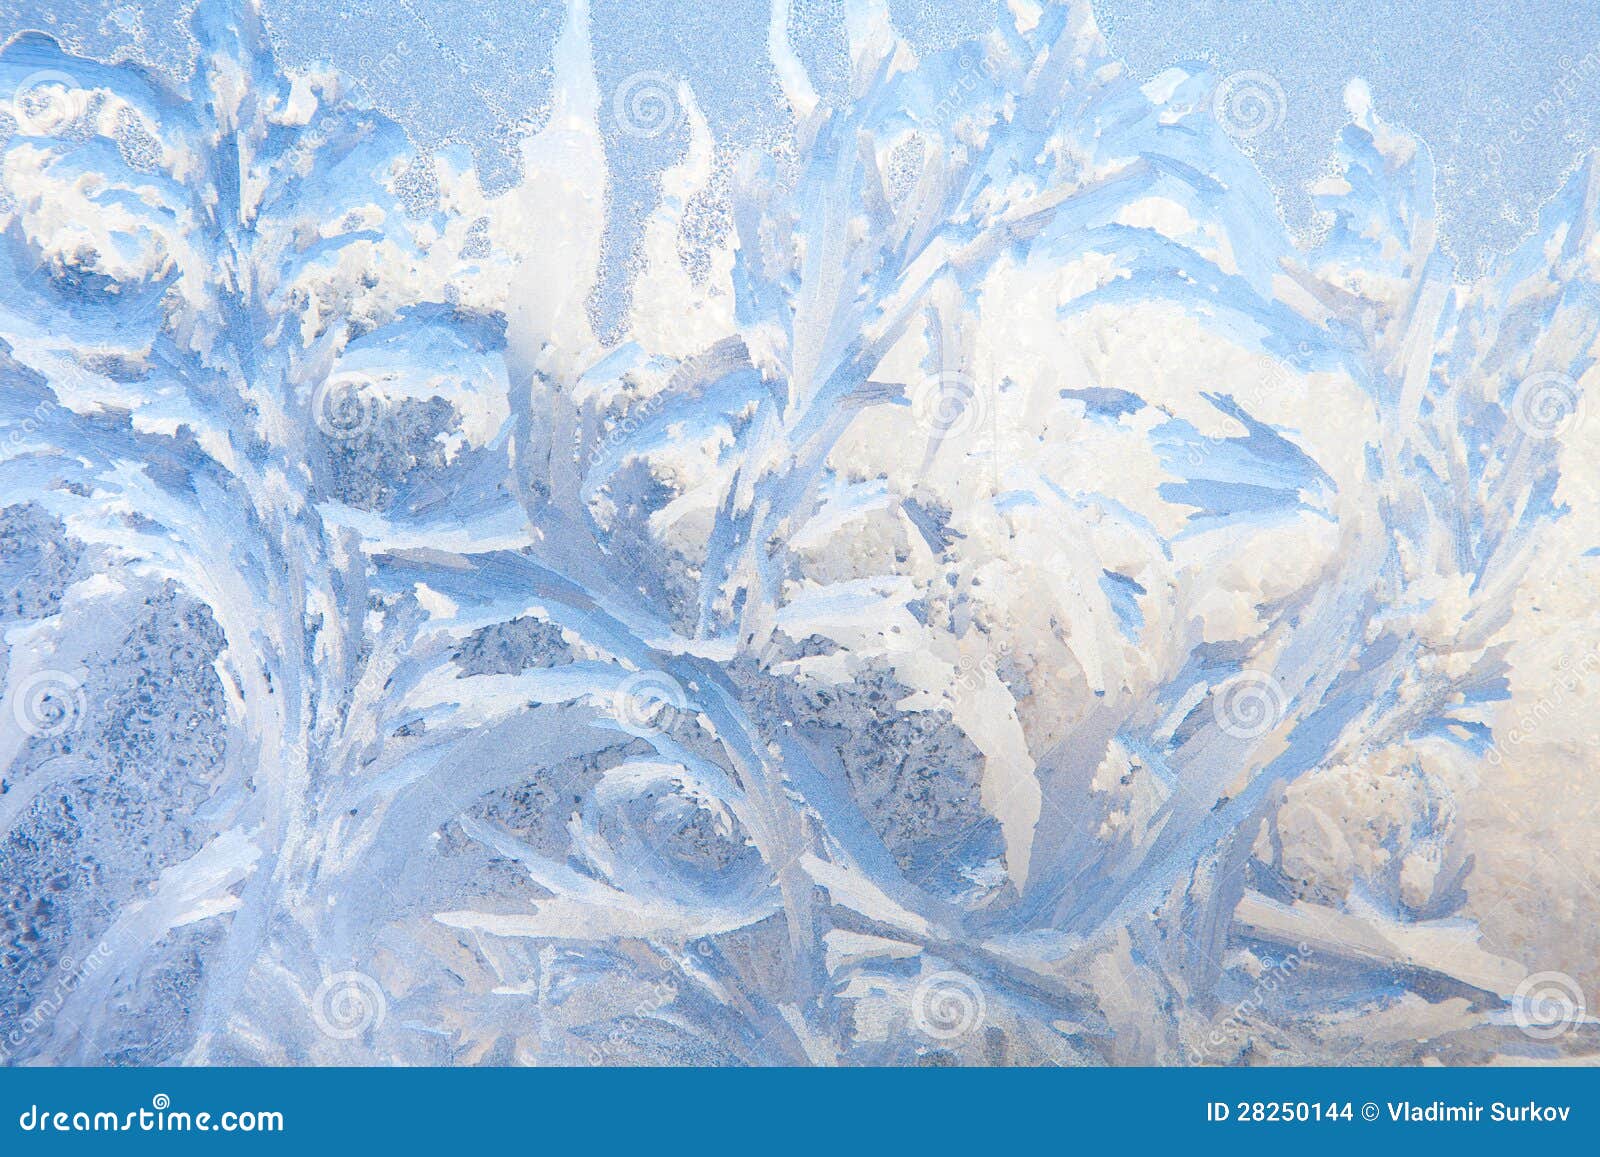 background of painting on the frozen window by frost - nobody